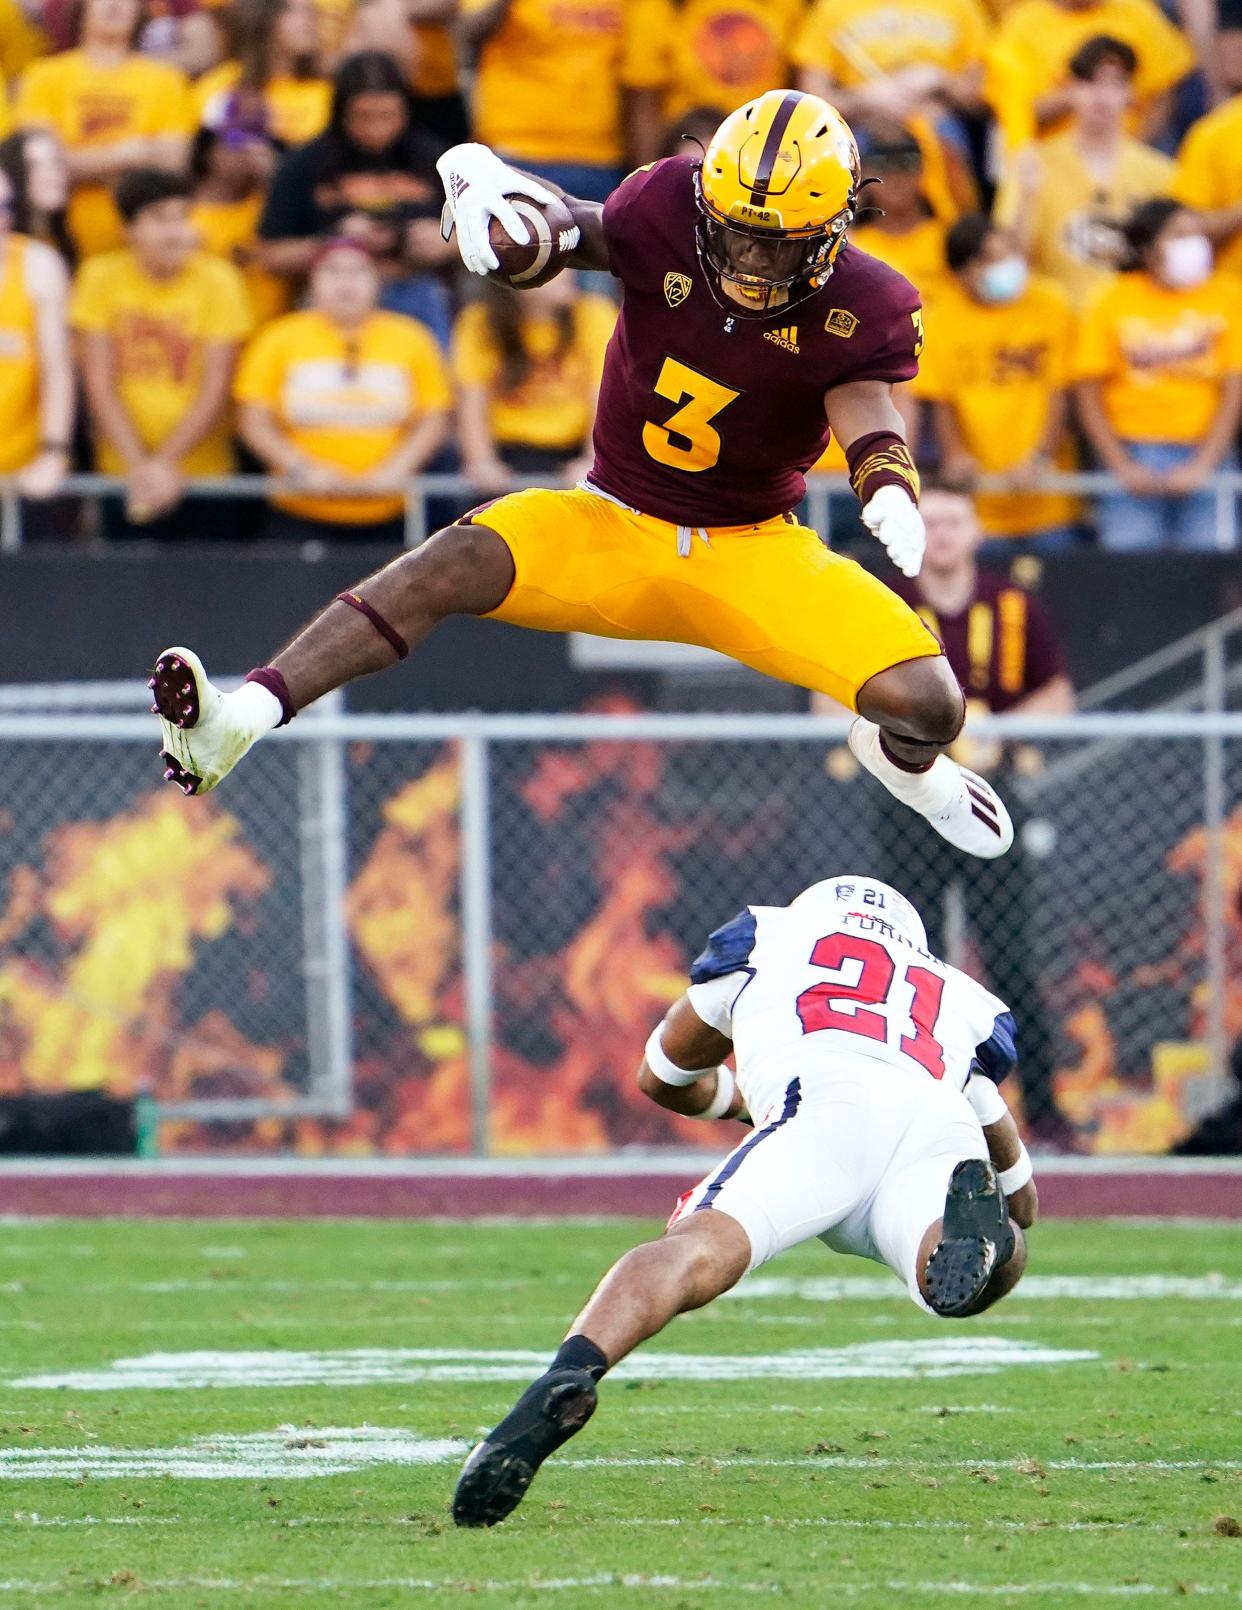 Arizona State Sun Devils running back Rachaad White (3) jumps over Arizona Wildcats safety Jaxen Turner (21) during the 95th Territorial Cup game at Sun Devil Stadium in Tempe, Arziona, on Nov. 27, 2021.